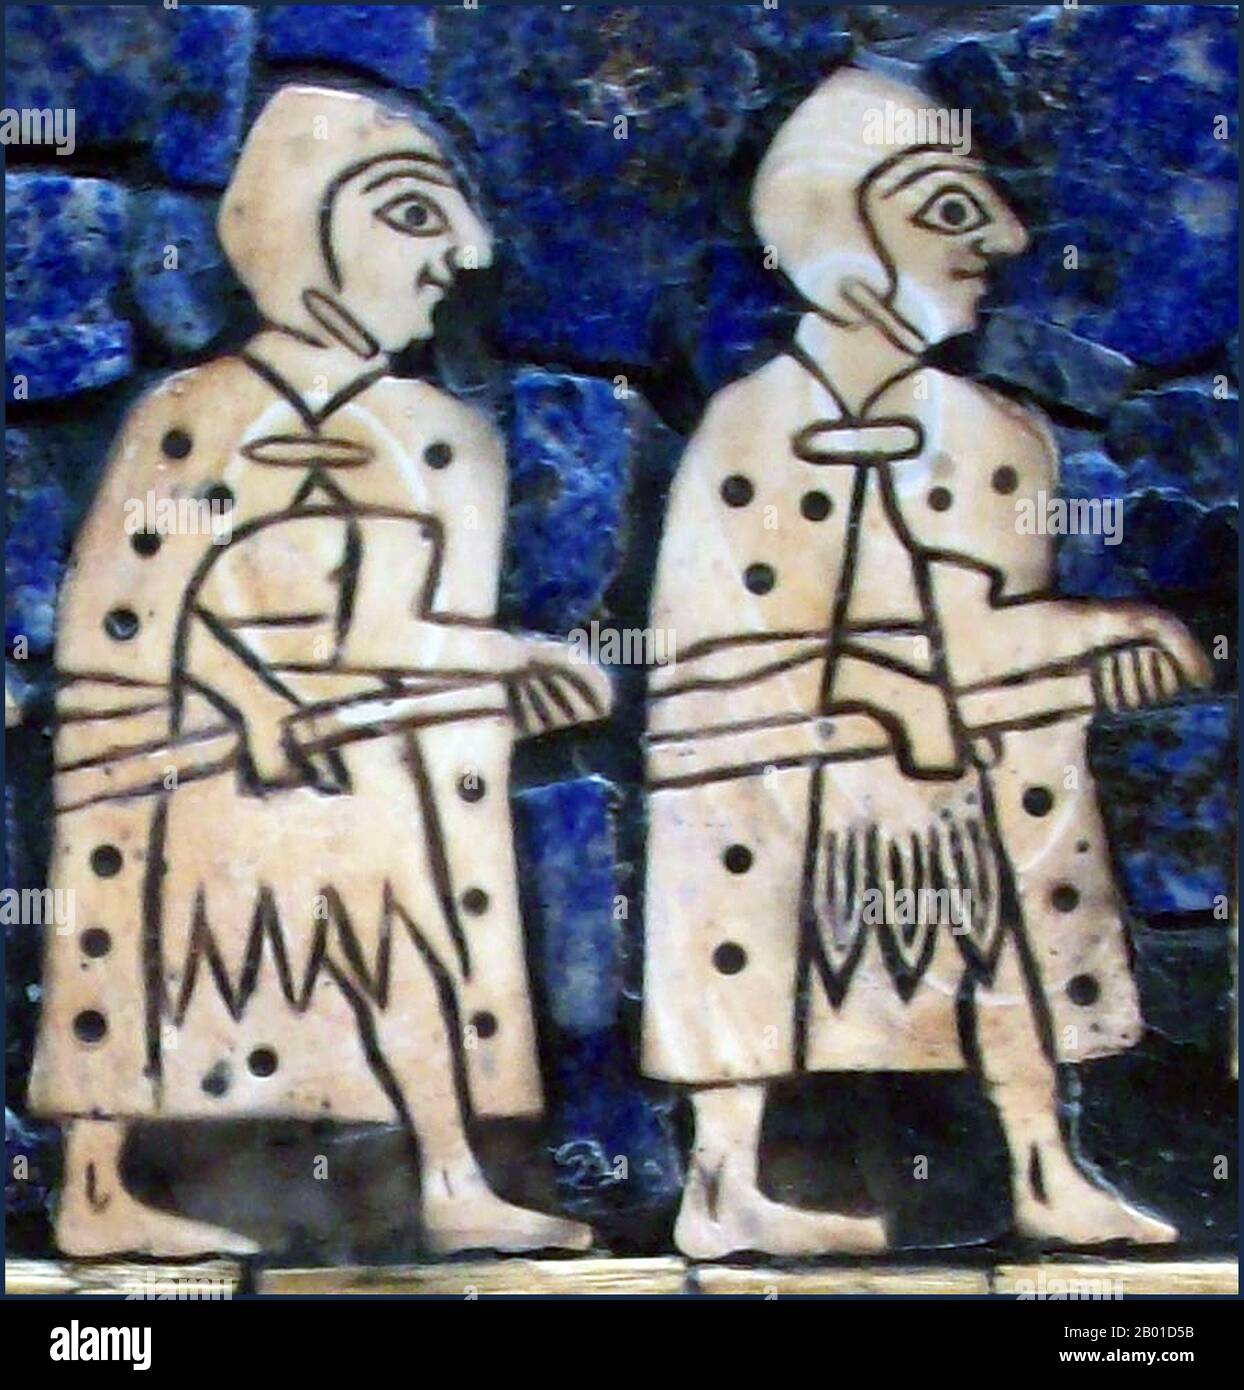 Iraq: Detail from the war side of the Standard of Ur (also known as the 'Battle Standard of Ur', or the 'Royal Standard of Ur') depicting two soldiers, a Sumerian artifact excavated from the Royal Cemetery in the ancient city of Ur, located in modern-day Iraq to the south of Baghdad, c. 2600 BCE.  The Standard of Ur survived in only a fragmentary condition, as the effects of time over the last several millennia had decayed the wooden frame and bitumen glue which had cemented the mosaic in place. The weight of the soil had crushed the object, fragmenting it and breaking the end panels. Stock Photo